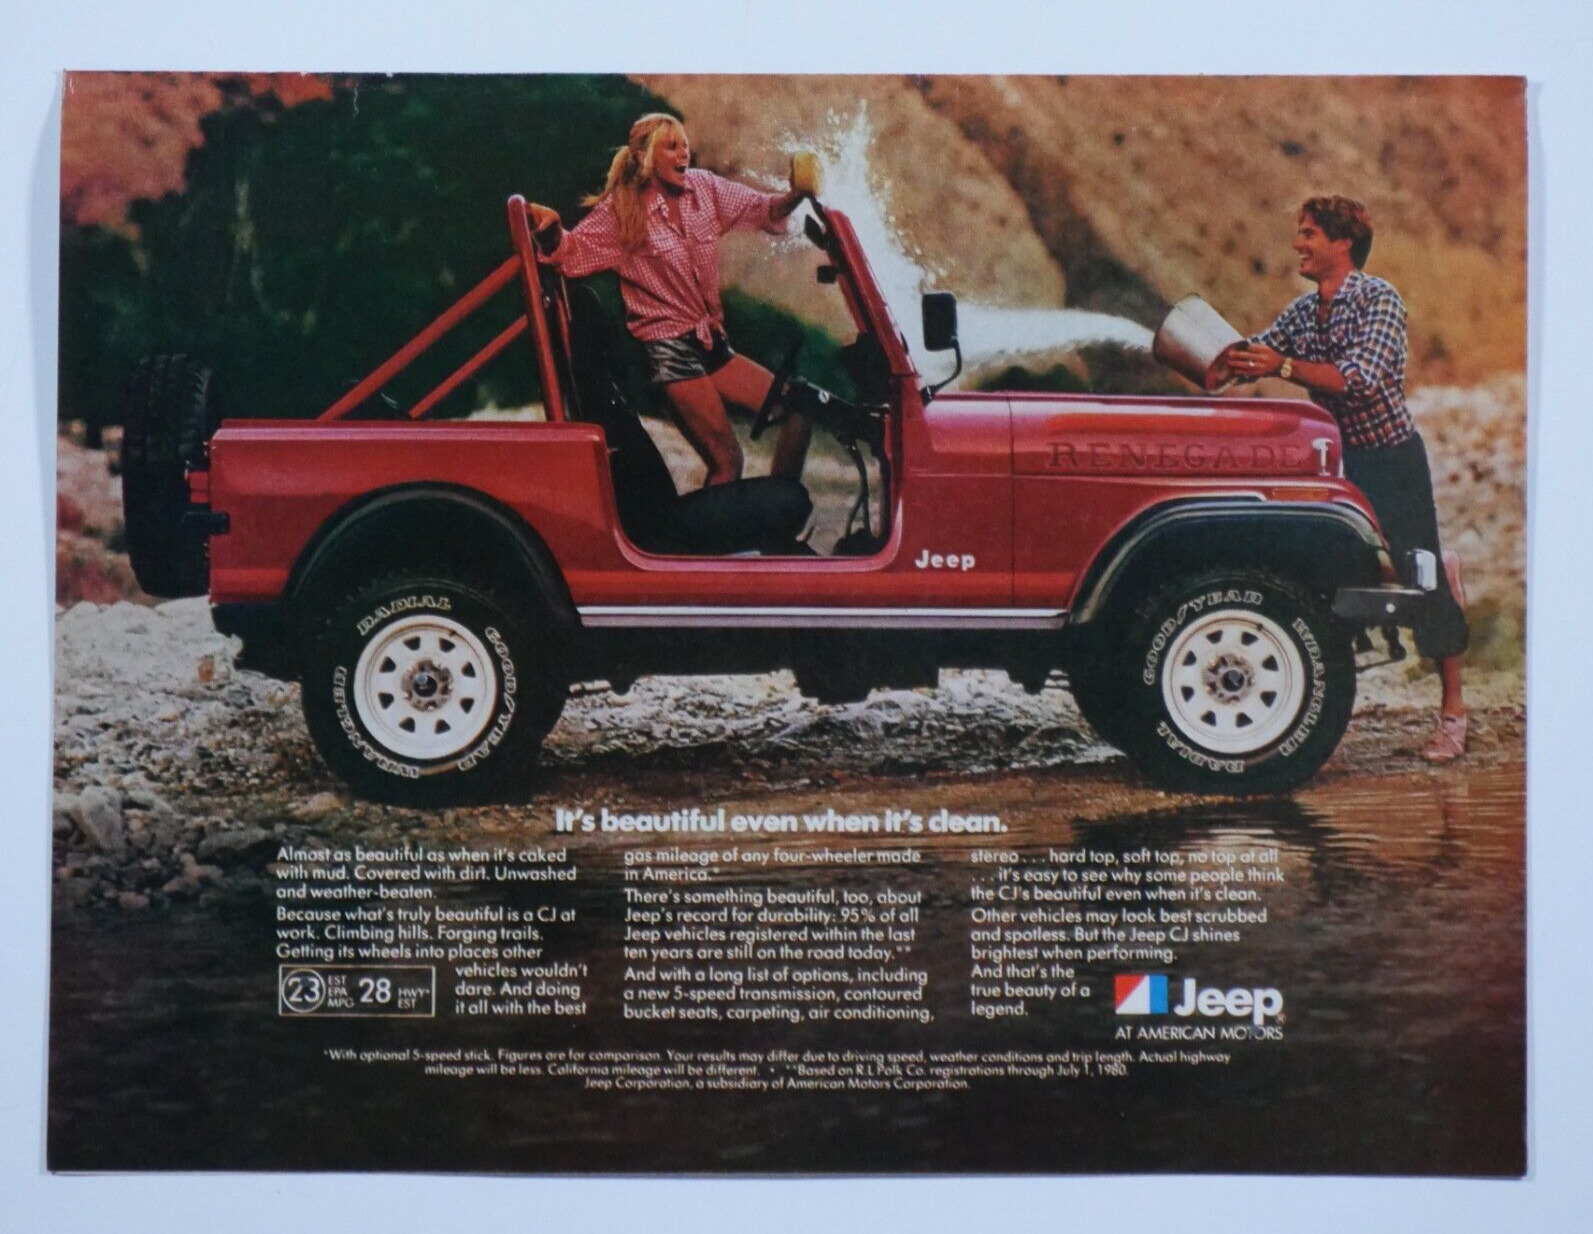 1982 Jeep Renegade Vintage Beautiful Even When Dirty Original Print Ad 8.5 x 11\